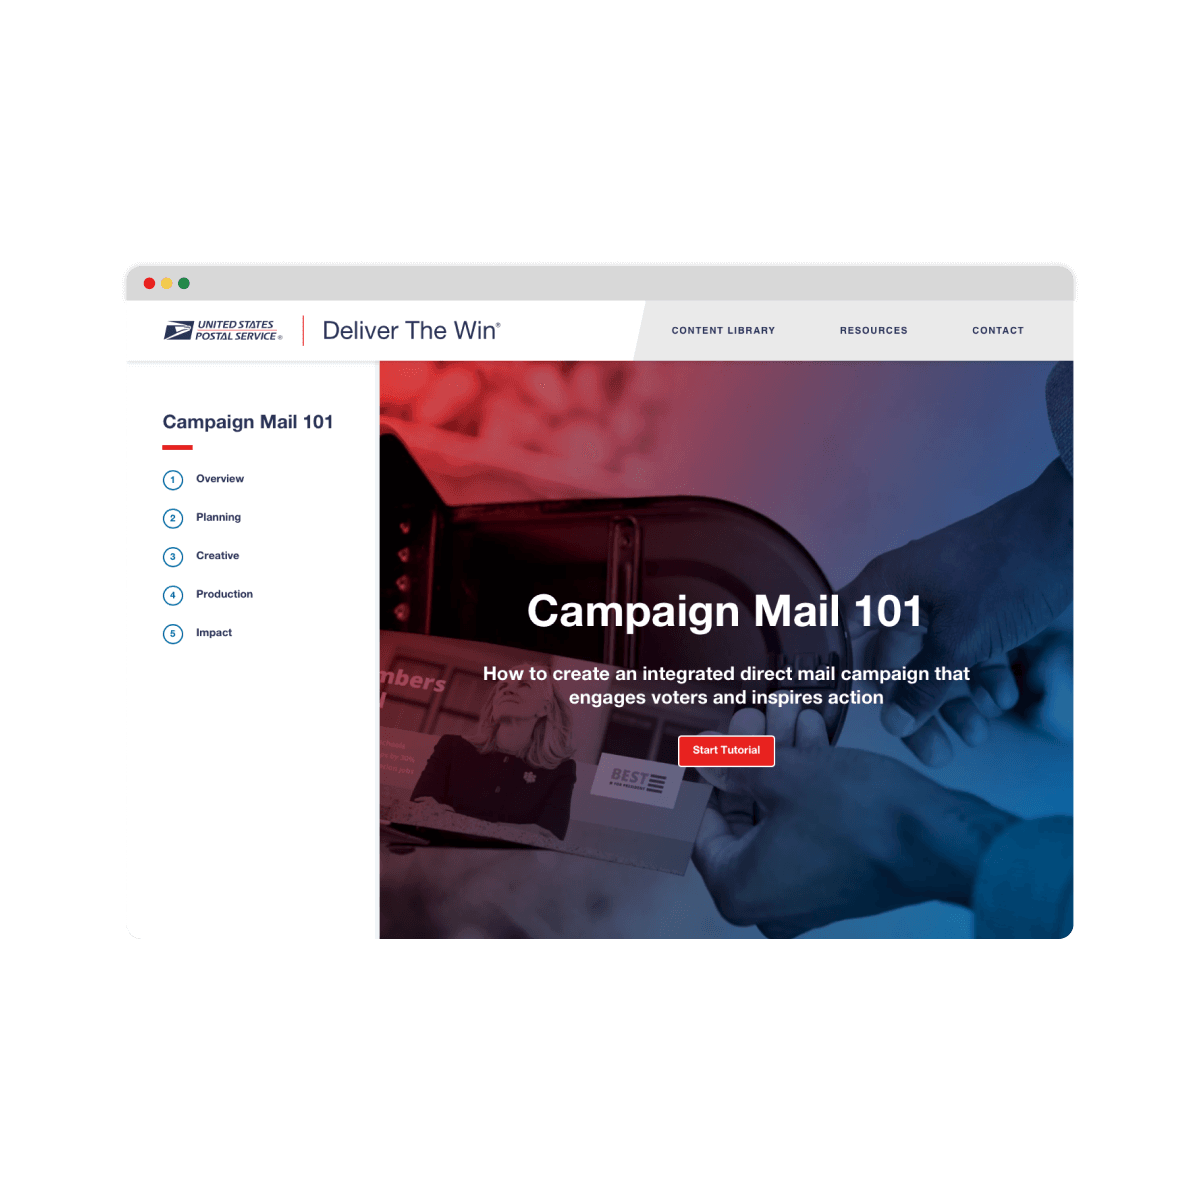 Campaign Mail 101 tutorial landing page with an image of a hand pulling a campaign mail piece out of a mailbox.